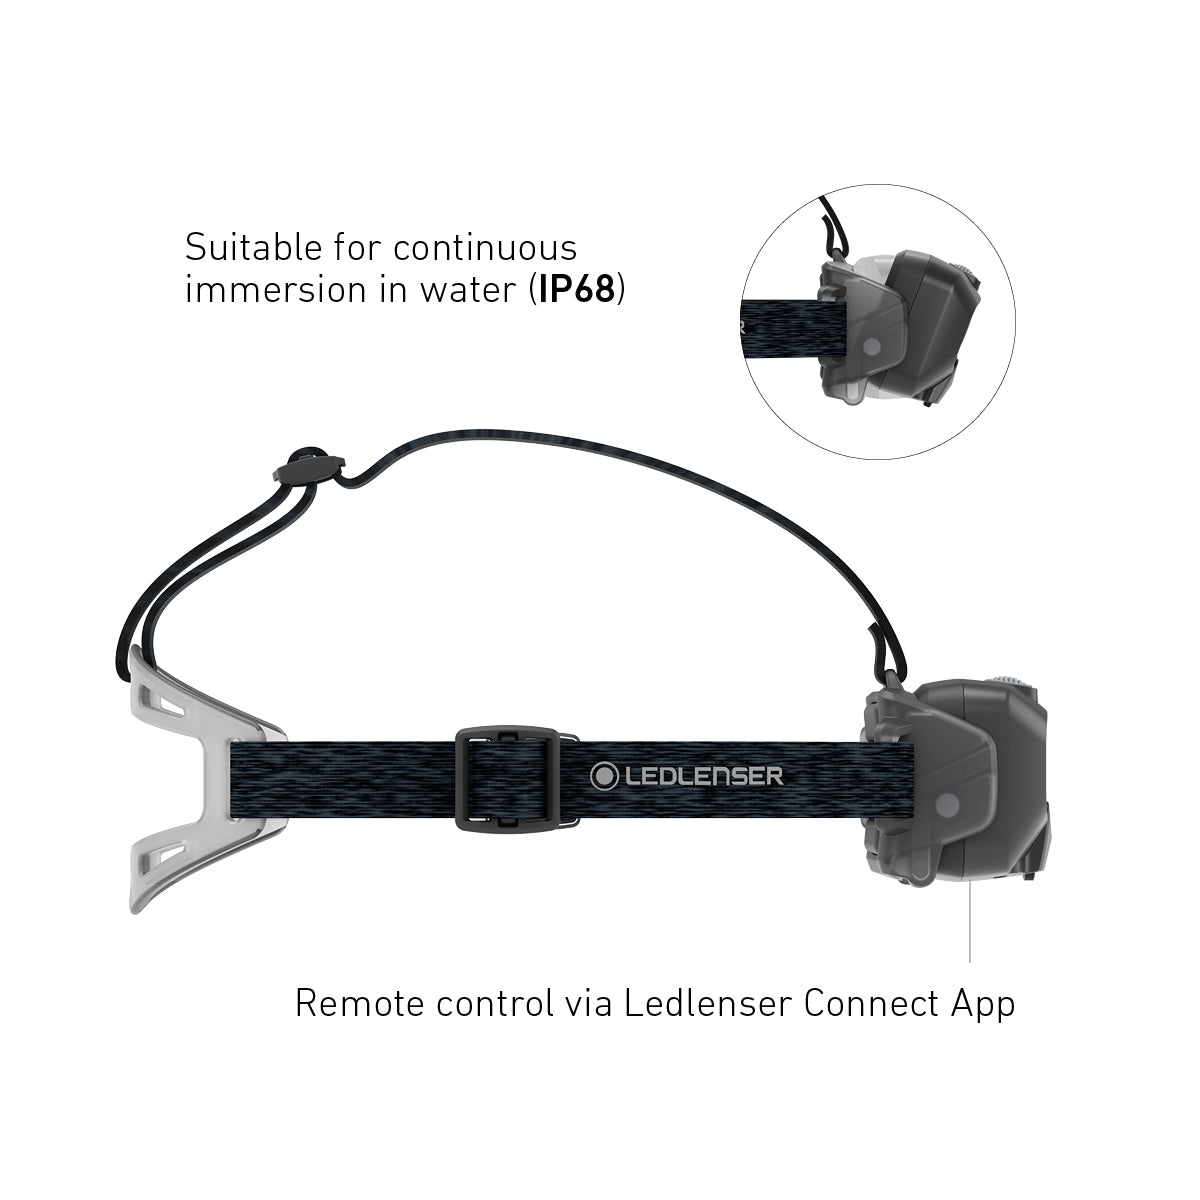 HF8R CORE Rechargeable Head Torch